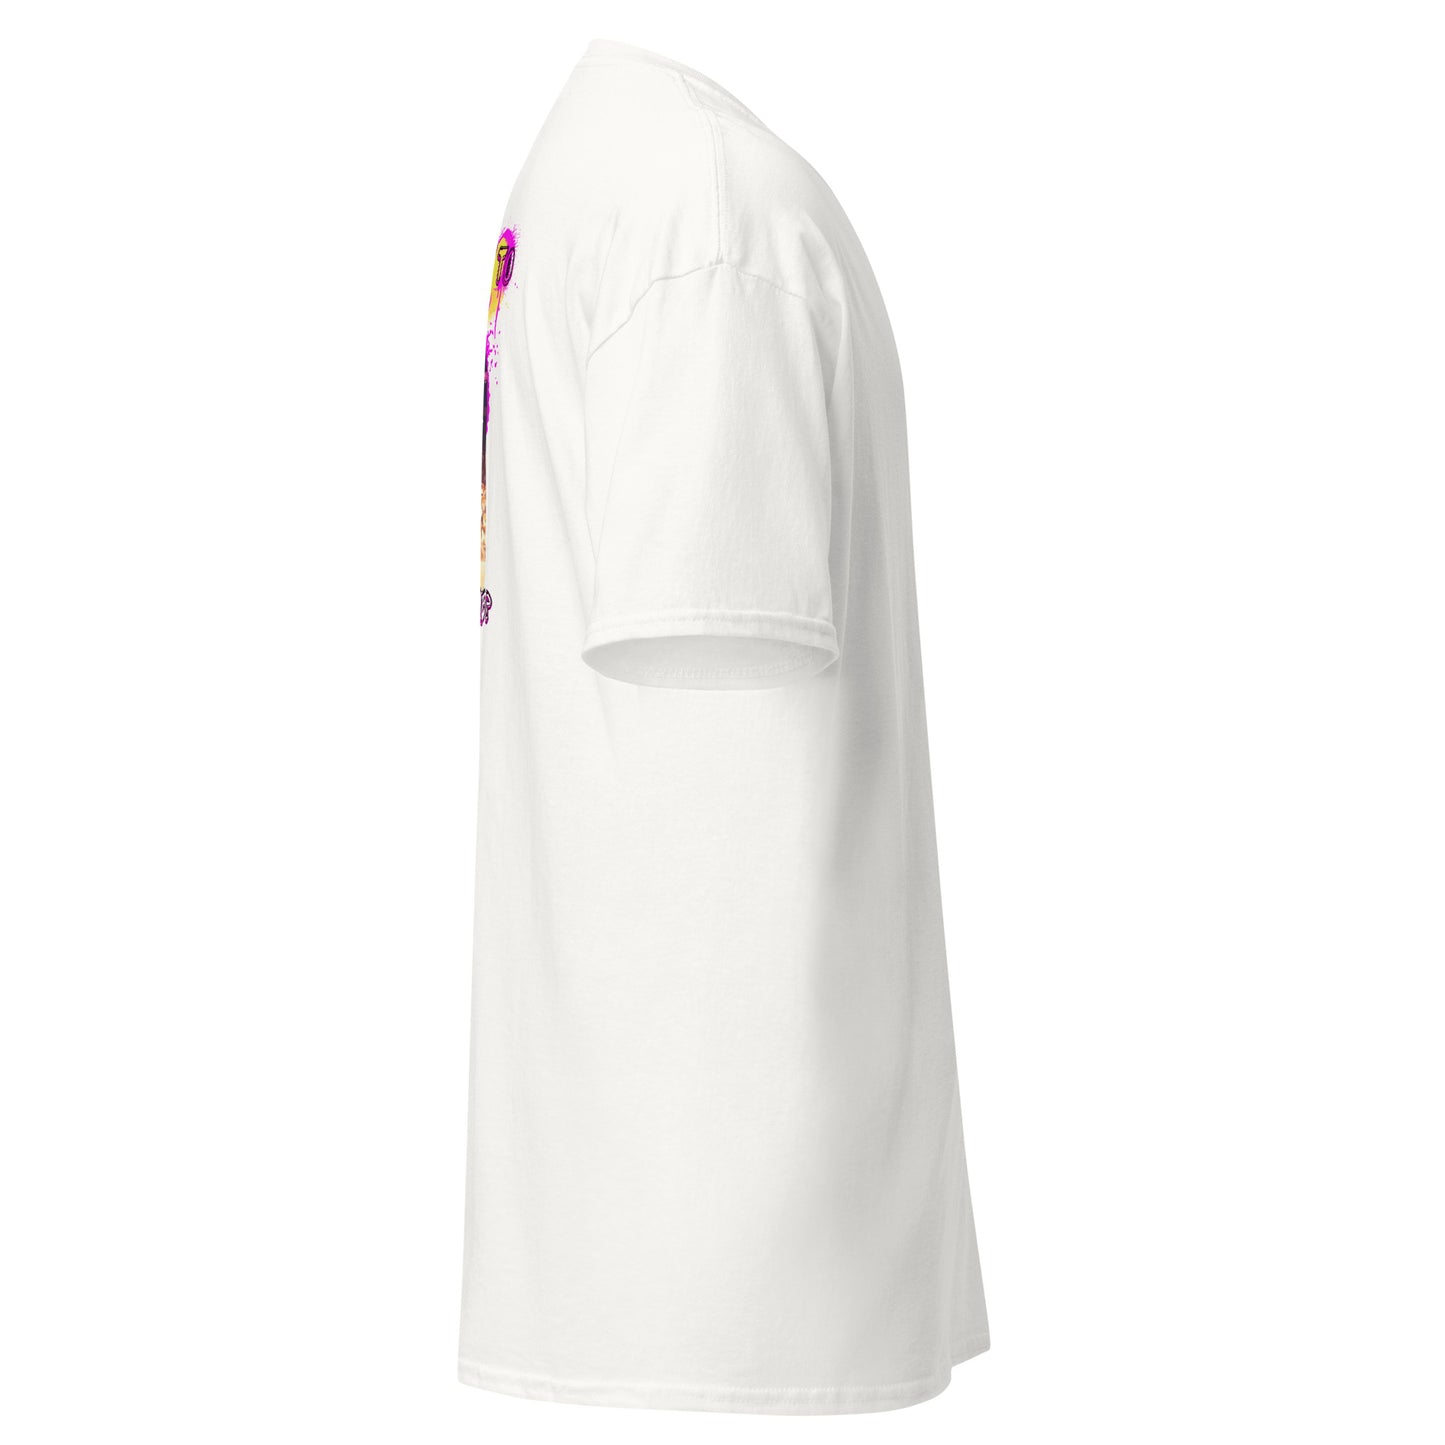 Darling in the NBA (white)